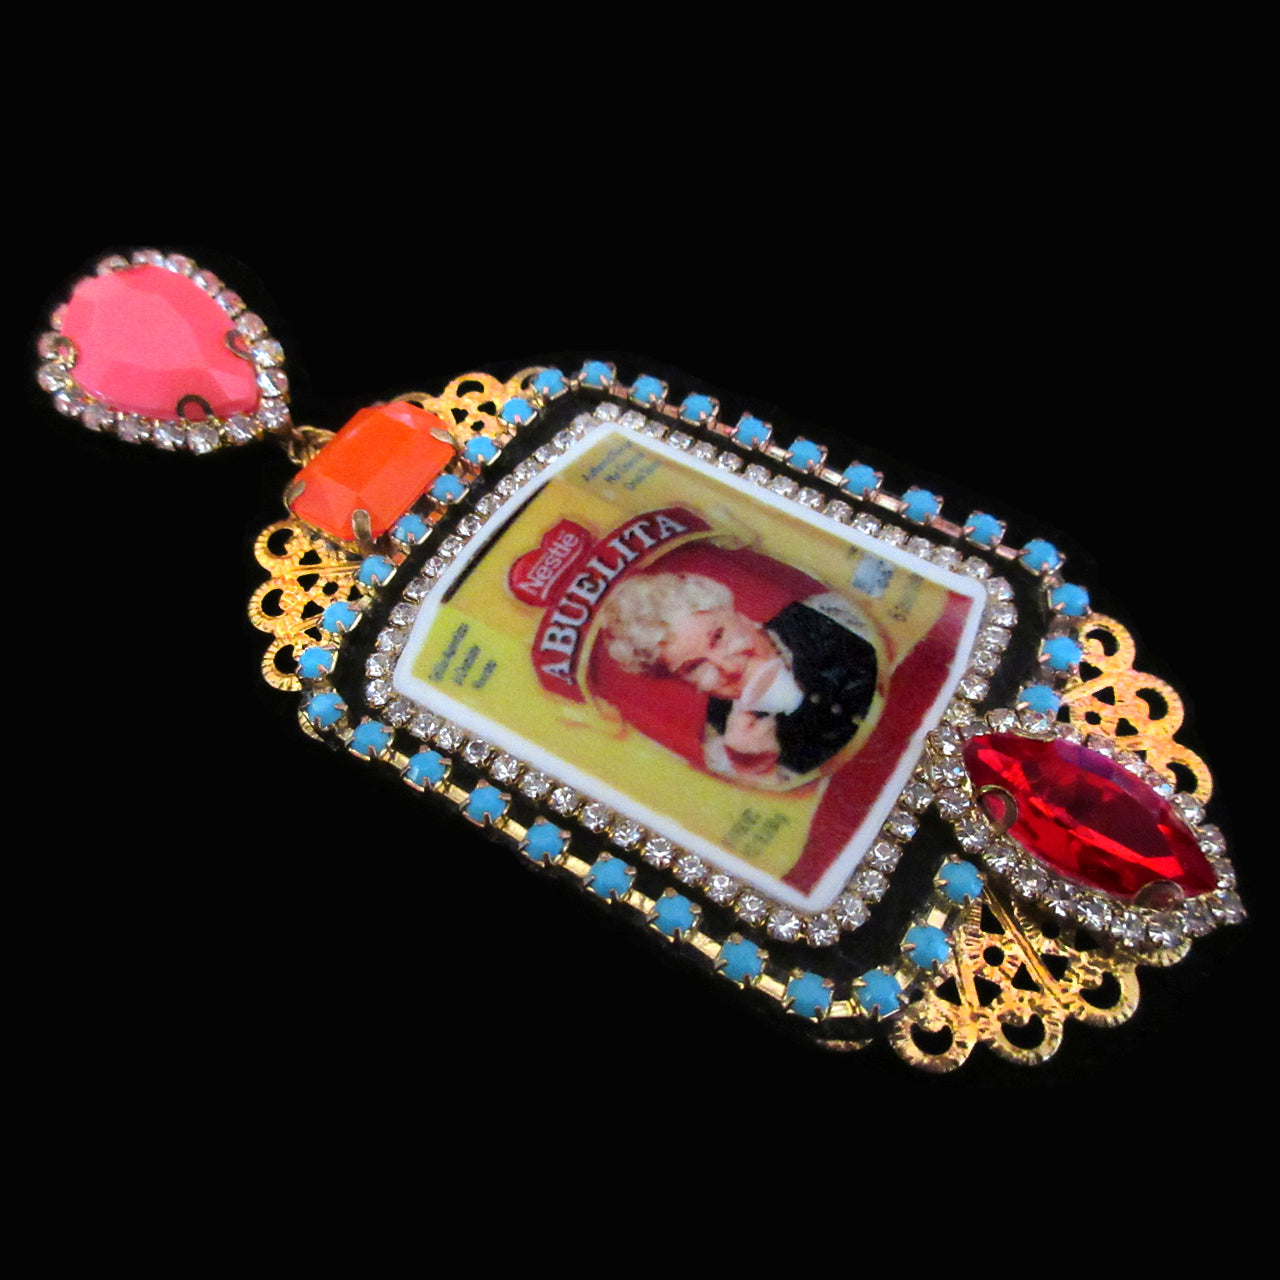 mouchkine jewelry earrings, an abuelita chic picture with red, pink and orange crystals. A luxury haute couture creation.